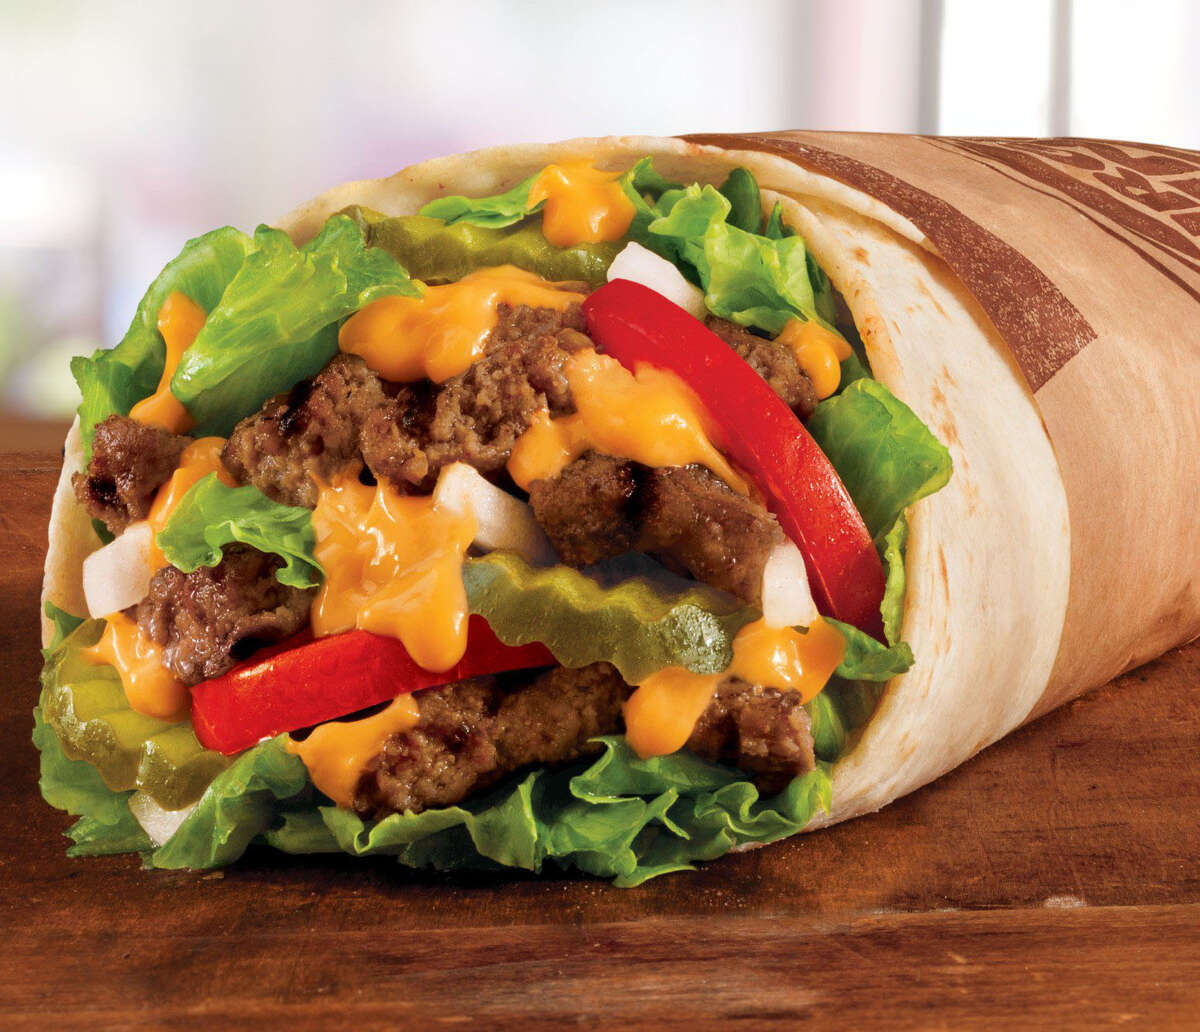 Whopperrito: The chain's iconic burger with a shot of Tex-Mex, stuffed neatly in a warm, soft flour tortilla. Total calories: 570. Fat grams: 26. Sodium: 1,110 mg. Carbs: 59 g. Dietary fiber: 2 g. Protein: 29 g. What Hoffman says: OK, I get it, a Whopper rewrapped as a wrap sandwich. But did Burger King have to stay so faithful to the Whopper breakdown and keep the pickles? There's something so wrong and unnatural about pickles in a burrito.